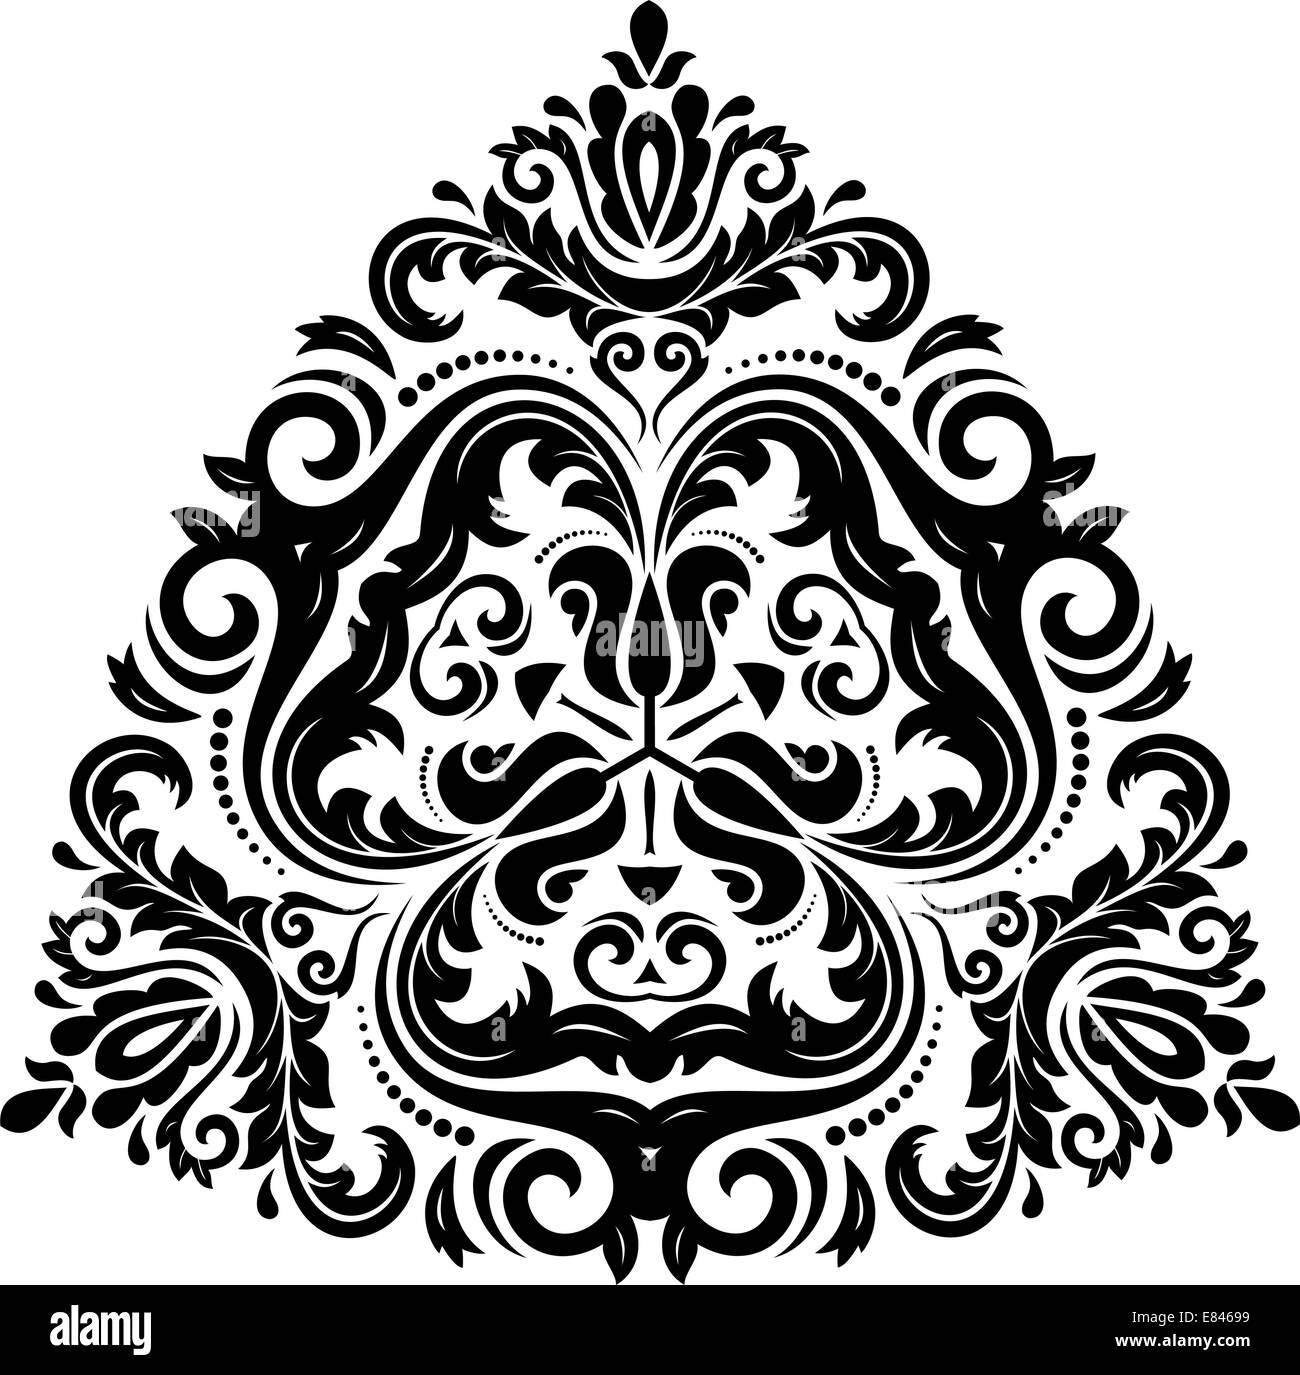 Orient vector ornamental round lace with damask and arabesque elements. Traditional ornament Stock Vector